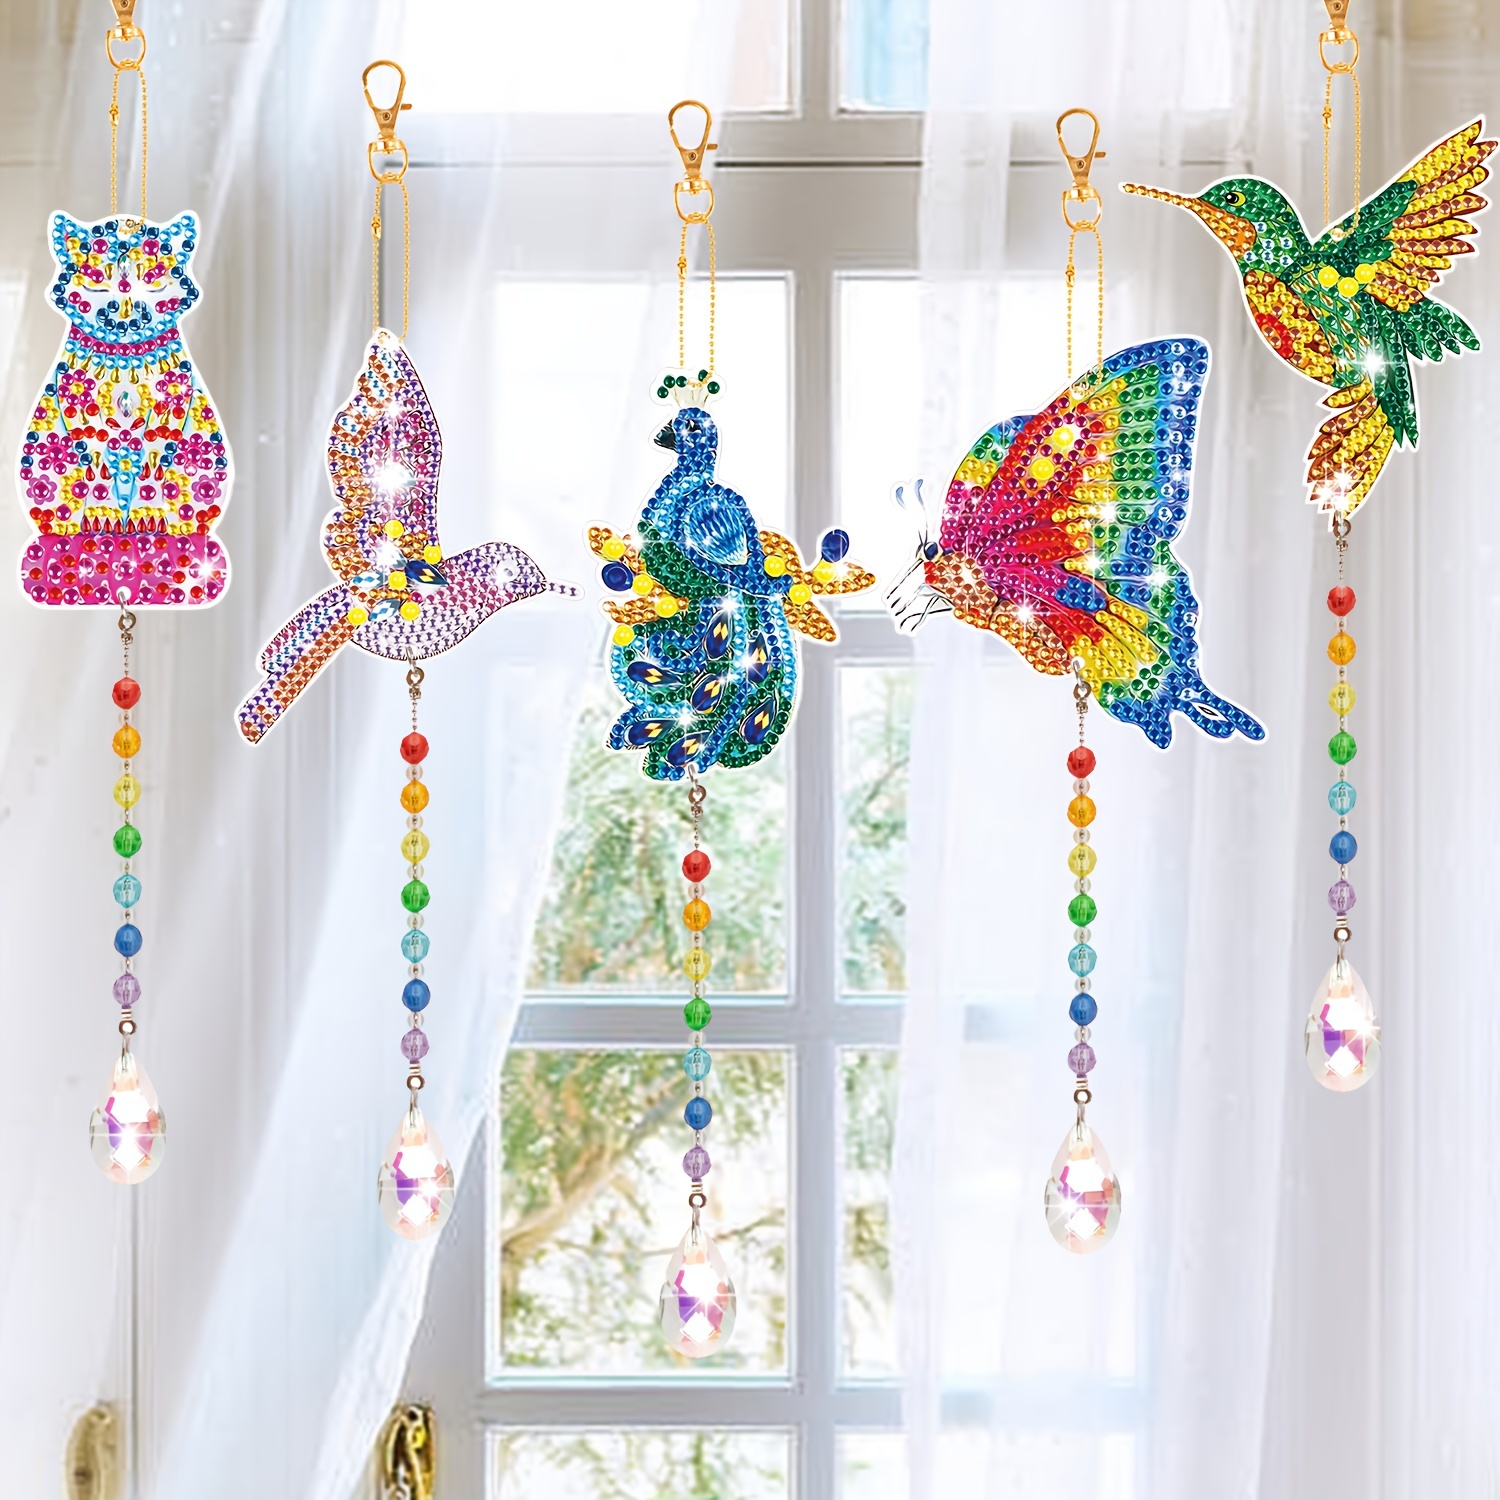  5 Pieces Diamond Painting Suncatcher Kits for Adults, Wind  Chime Kits for Kids Diamond Art Special Shapes Gem Paint by Number for  Garden Home Decor, Gift(Cat Hummingbird Peacock Butterfly) 